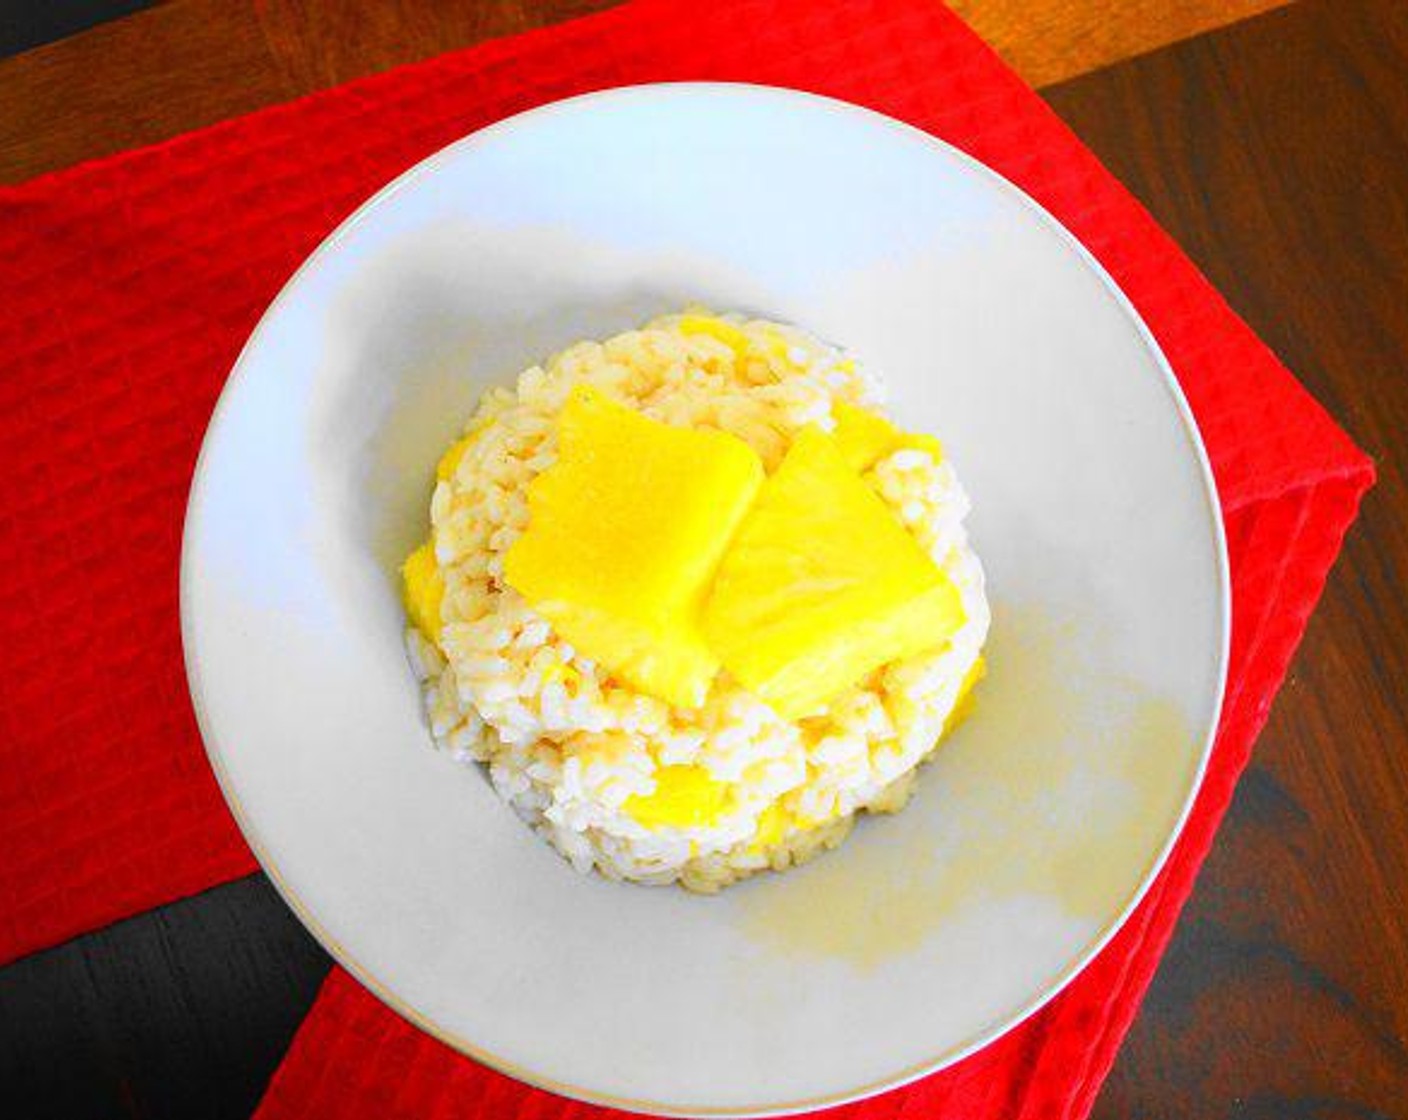 step 5 When the rice is cooked, take it off of the heat and stir in the cooked pineapple chunks and Ricotta Cheese (1 Tbsp). Then just plate and serve the pineapple risotto! Garnish with additional Fresh Pineapple Chunks (to taste). Serve and enjoy!